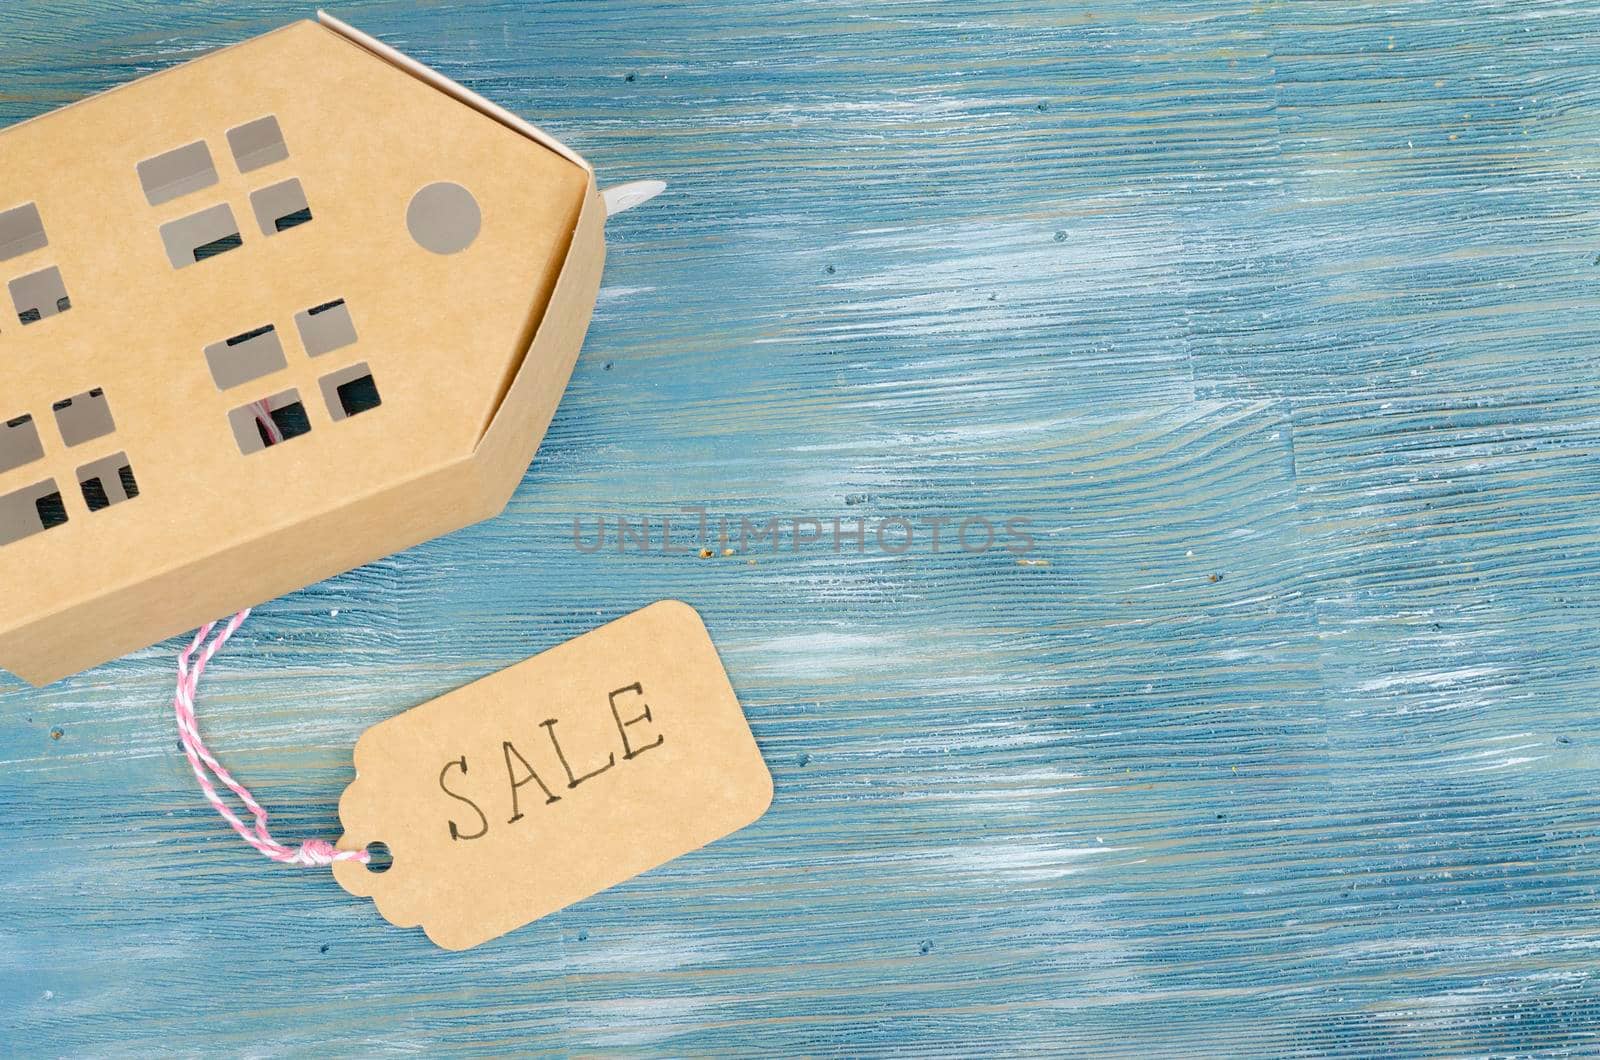 Real estate sale concept, paper model of residential building. Studio Photo